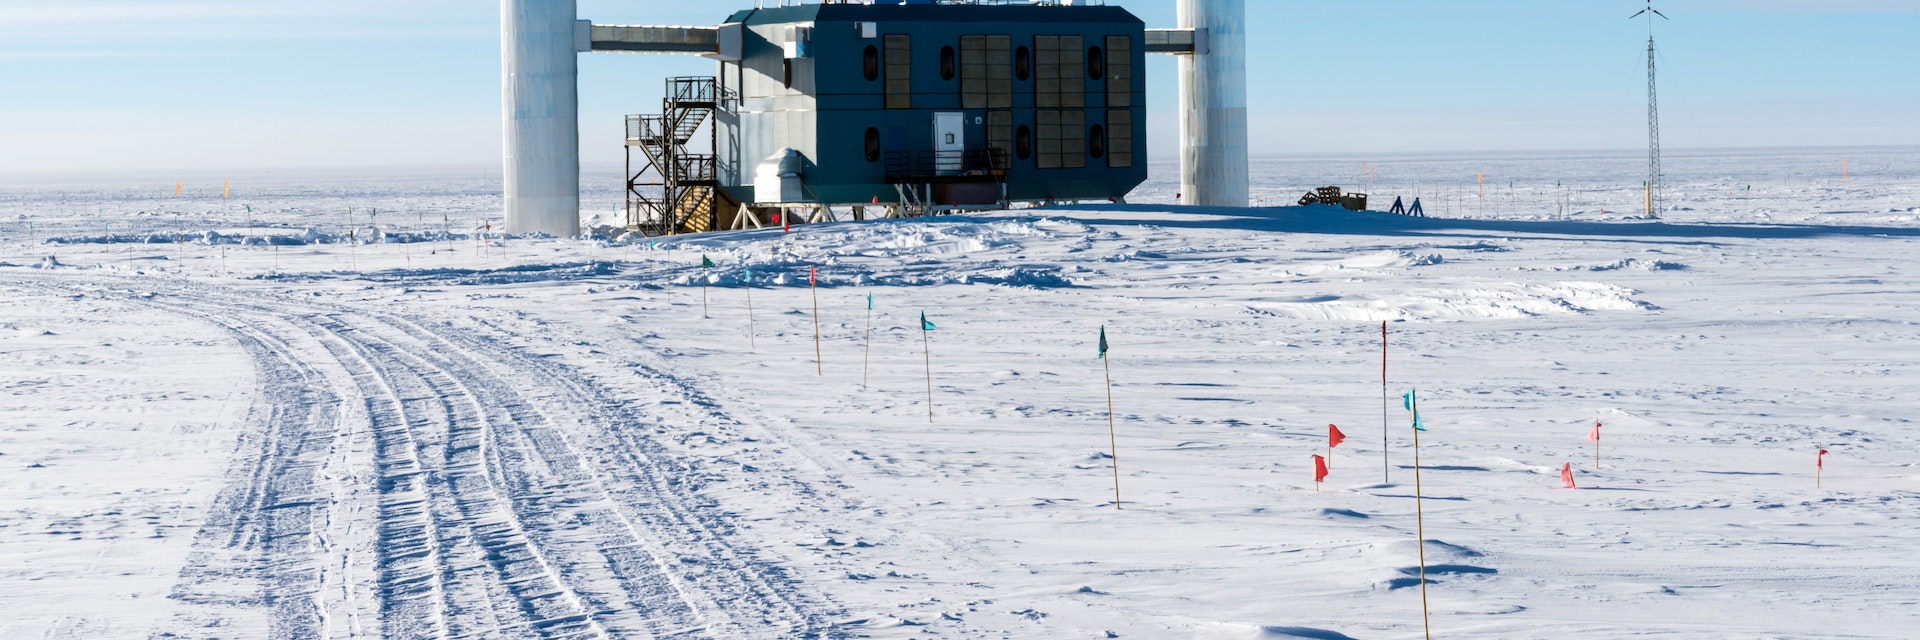 IceCube Neutrino Observatory at the south pole station; Shutterstock ID 1146088580; your: Bridget Brown; gl: 65050; netsuite: Online Editorial; full: POI Image Update